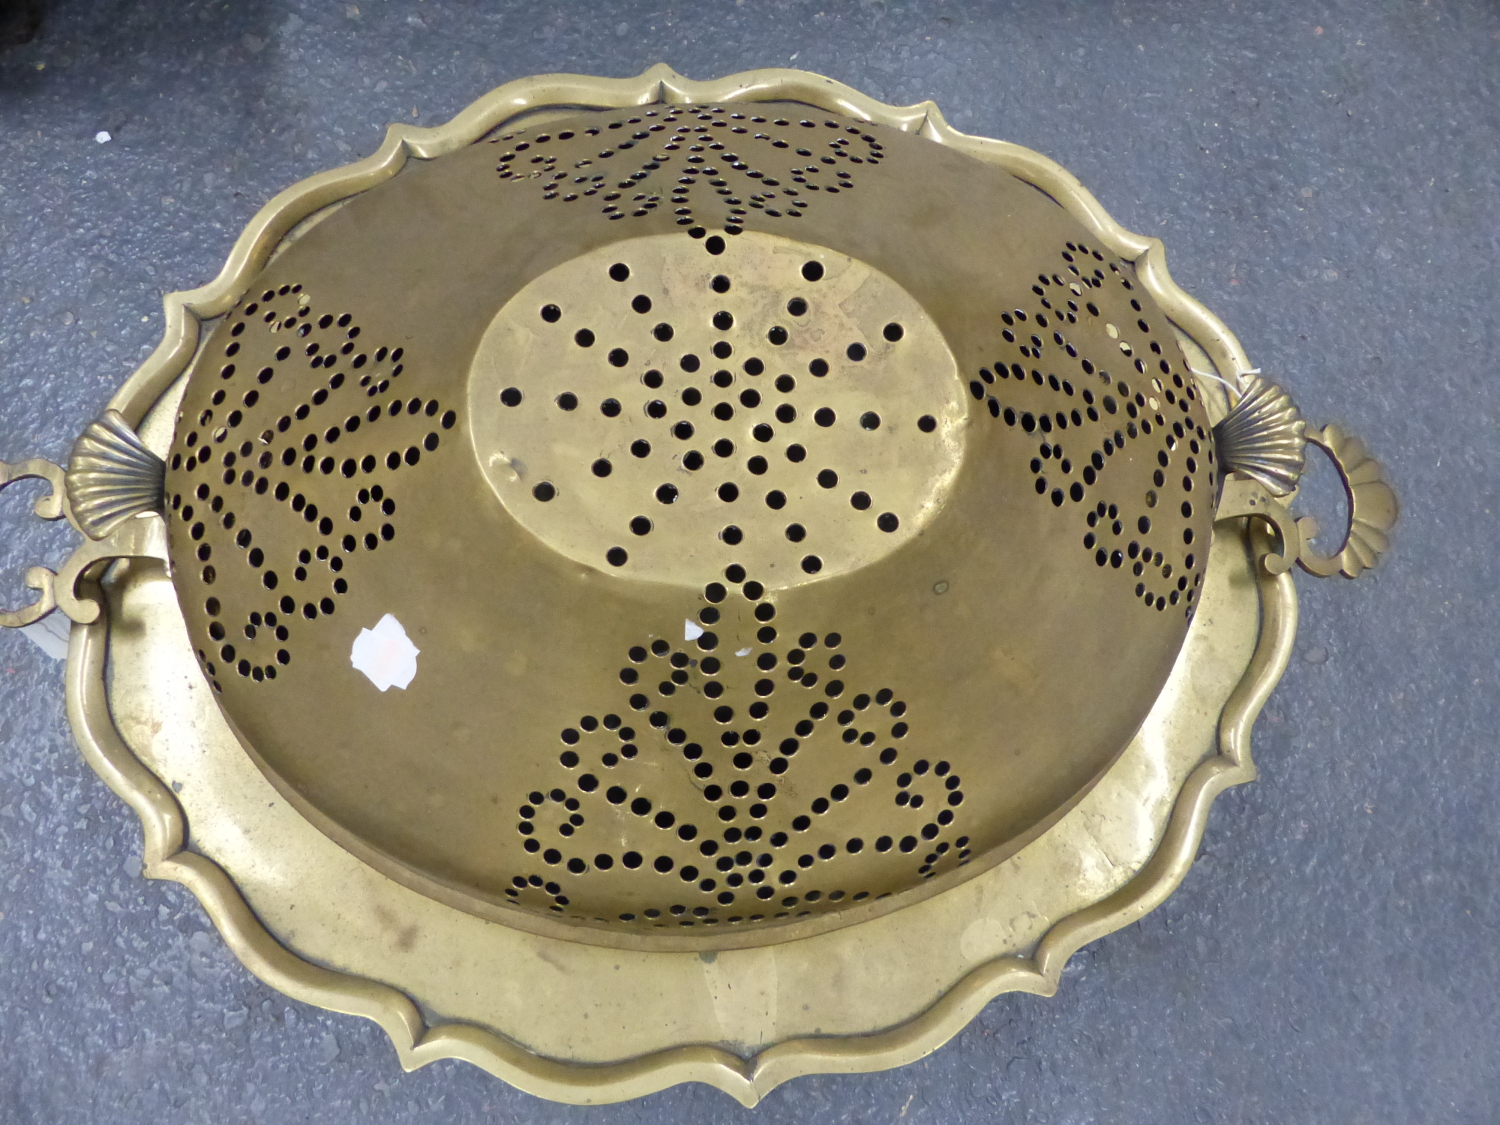 A PERSIAN HEAVY CAST AND PIERCED BRASS BRAZIER WITH DOME COVER, OVAL LOBED FORM WITH SCROLL FEET. H. - Image 2 of 6